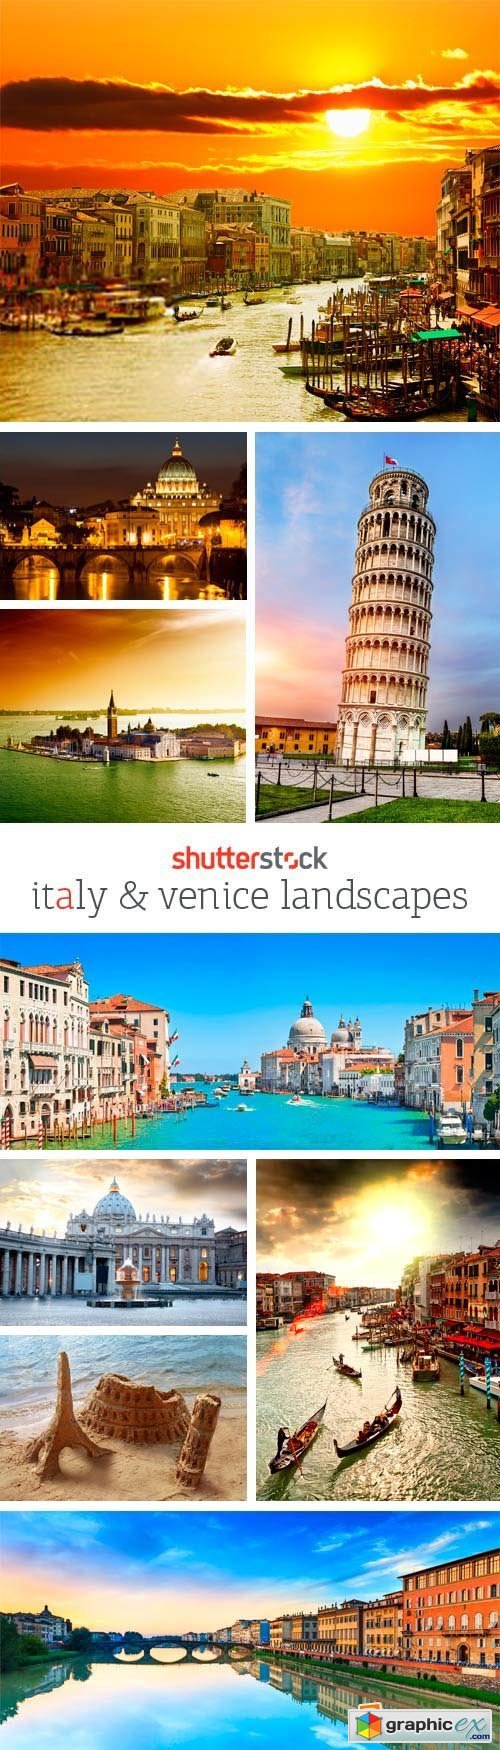 Amazing SS - Italy & Venice Landscapes, 25xJPGs